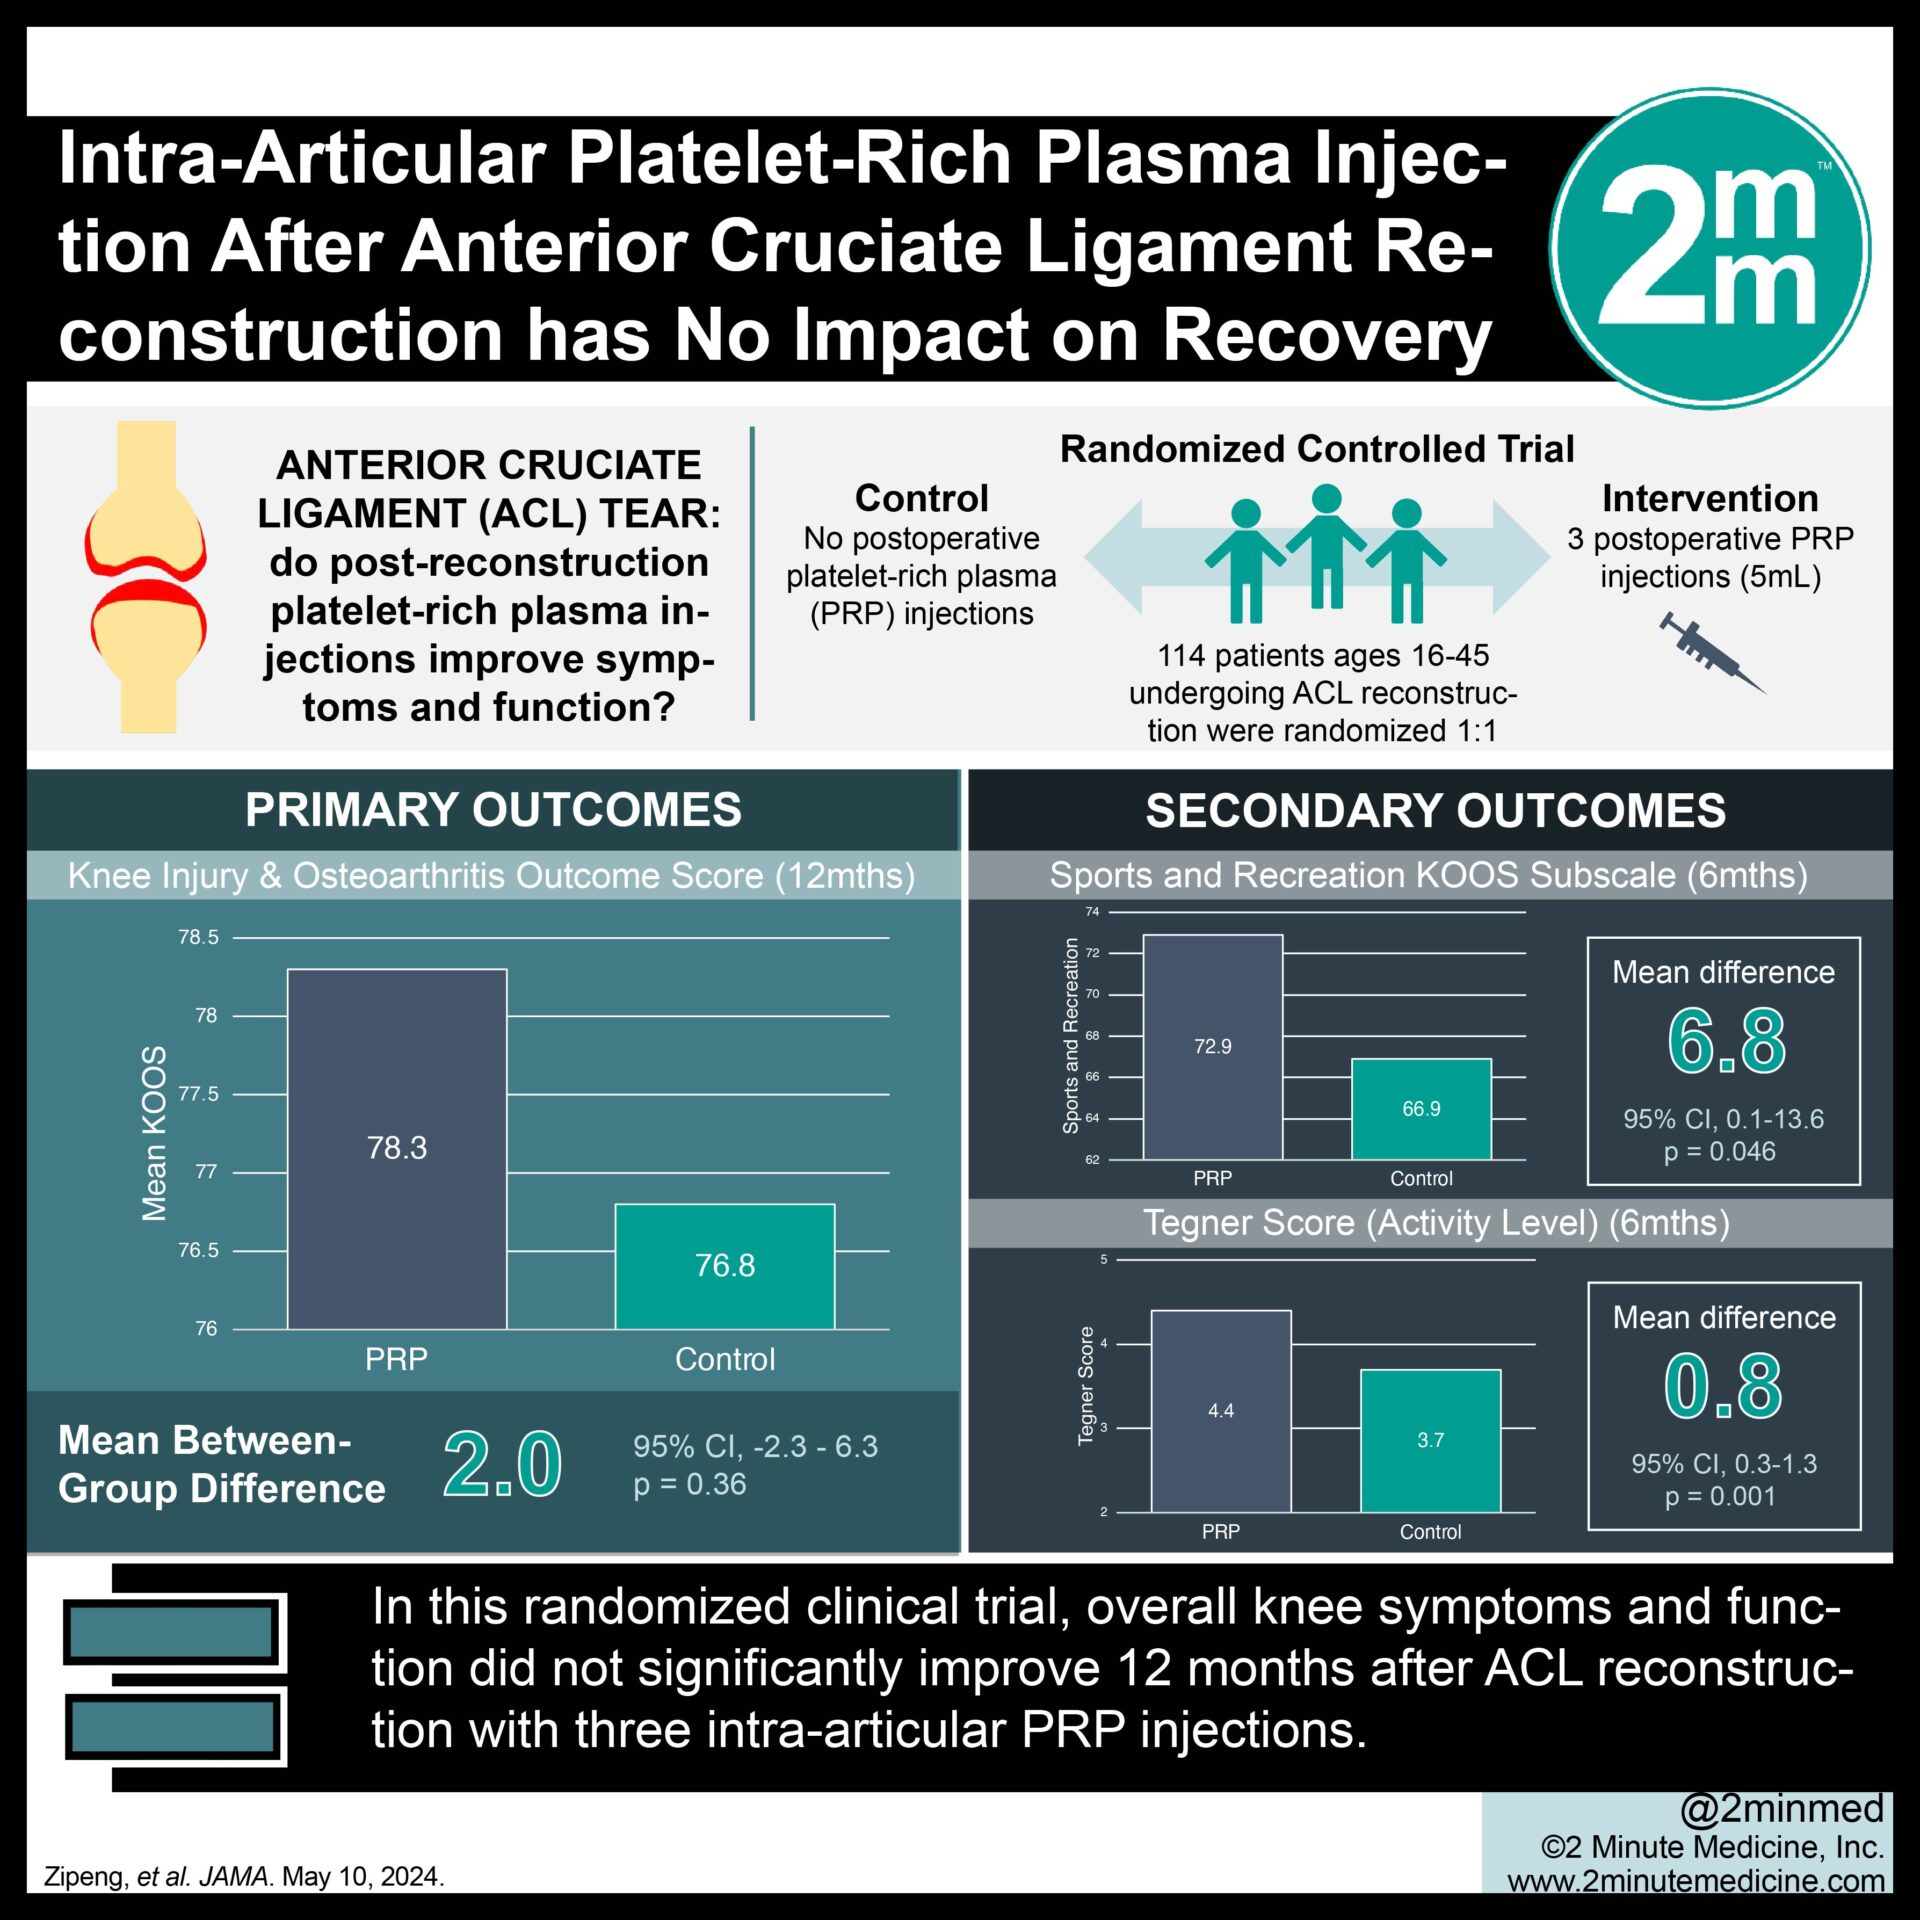 #VisualAbstract: Intra-Articular Platelet-Rich Plasma Injection After Anterior Cruciate Ligament Reconstruction has No Impact on Recovery